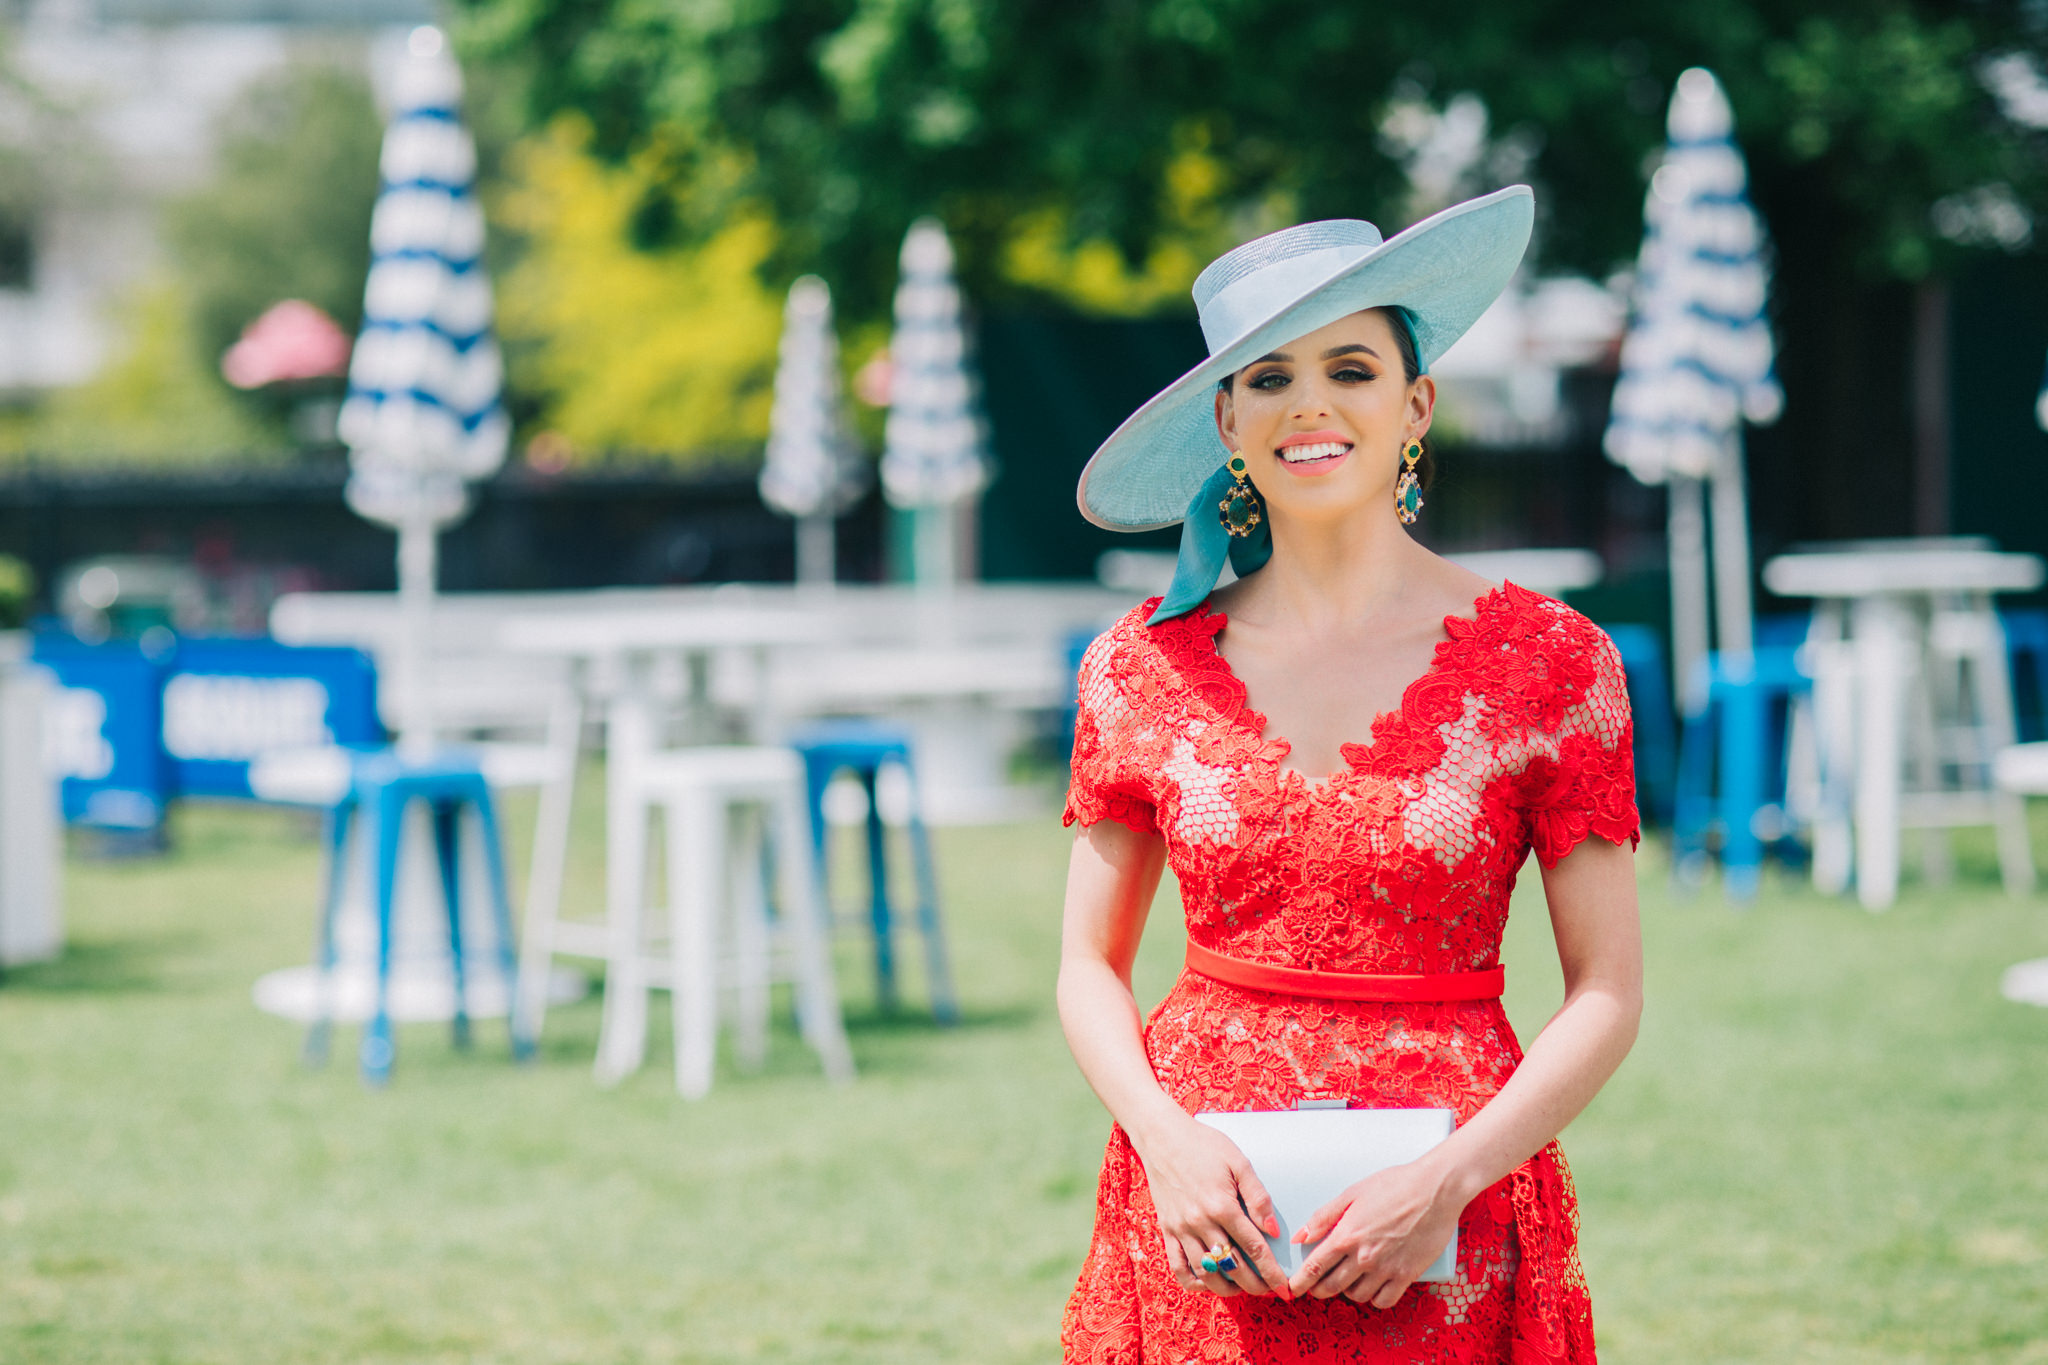 expensive fashions on the field outfits 2017 - what to wear to the races